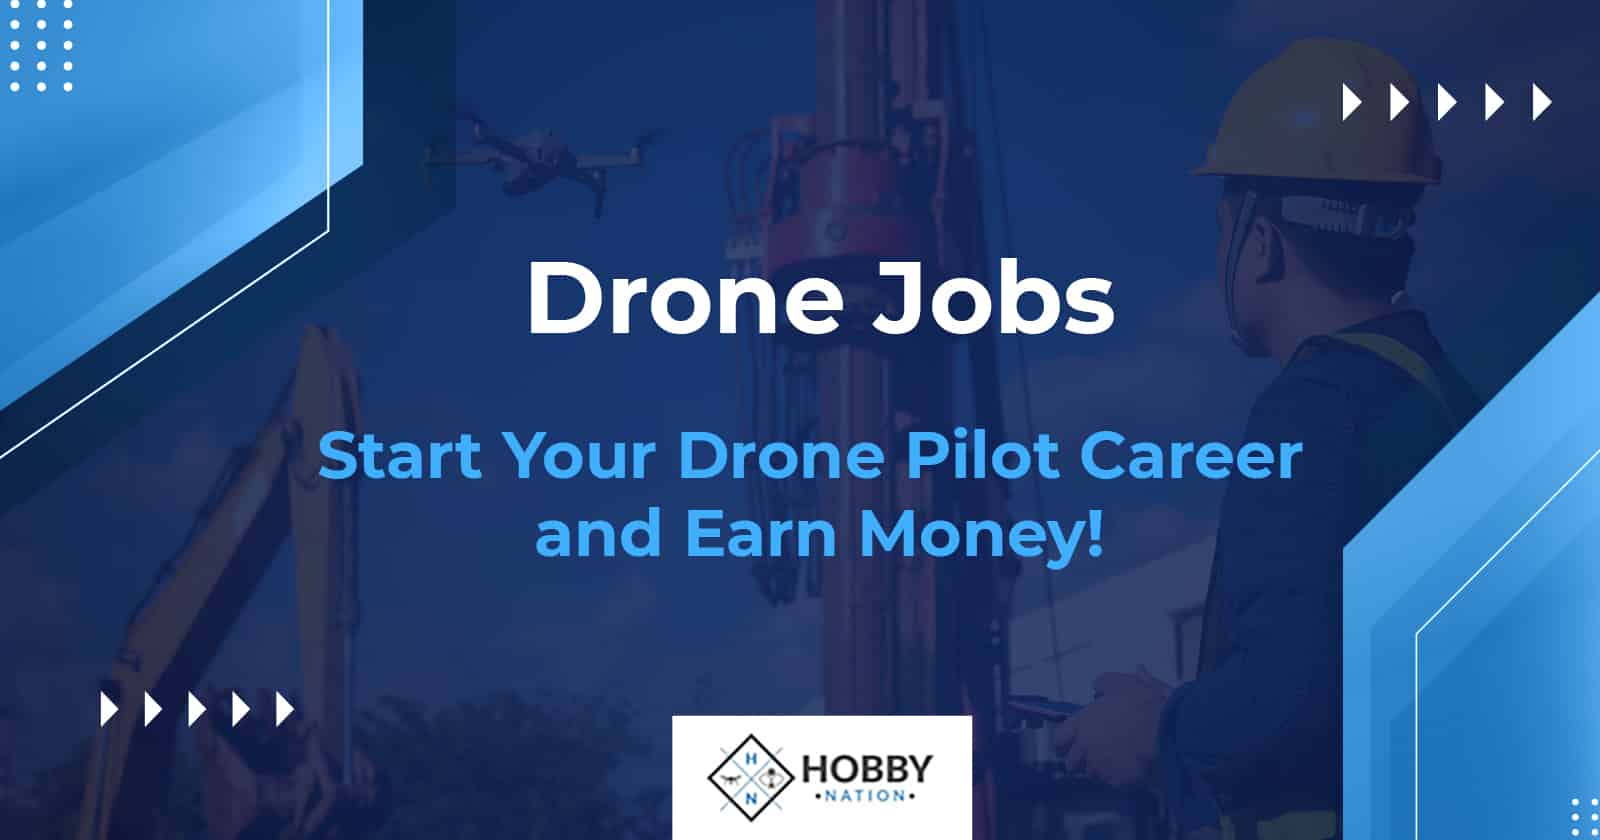 Drone Jobs &#8211; Start Your Drone Pilot Career and Earn Money!